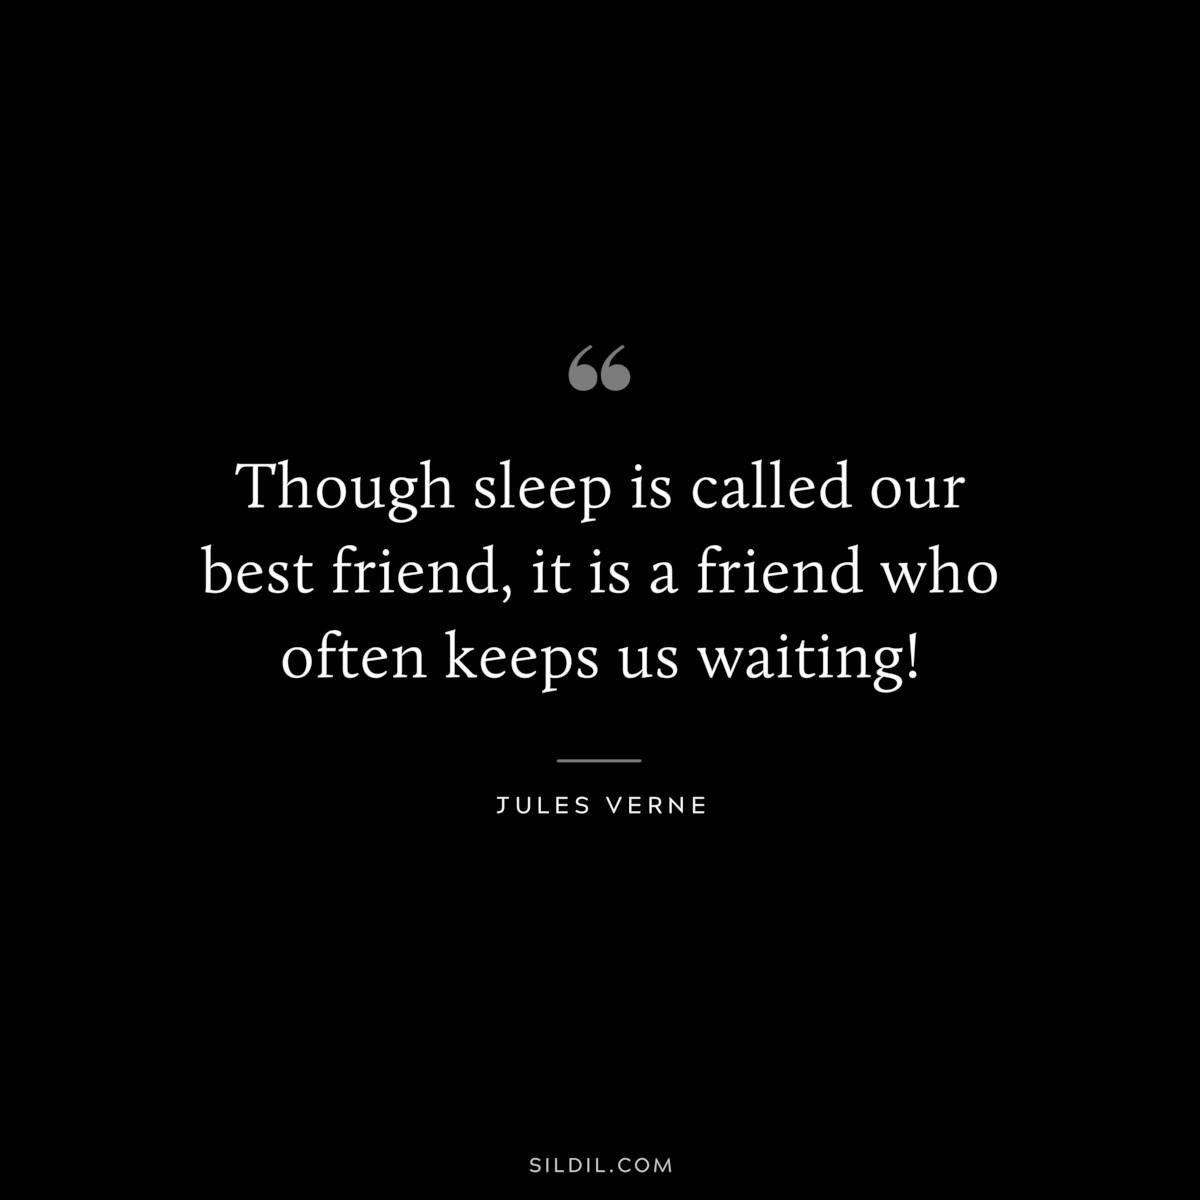 Though sleep is called our best friend, it is a friend who often keeps us waiting!